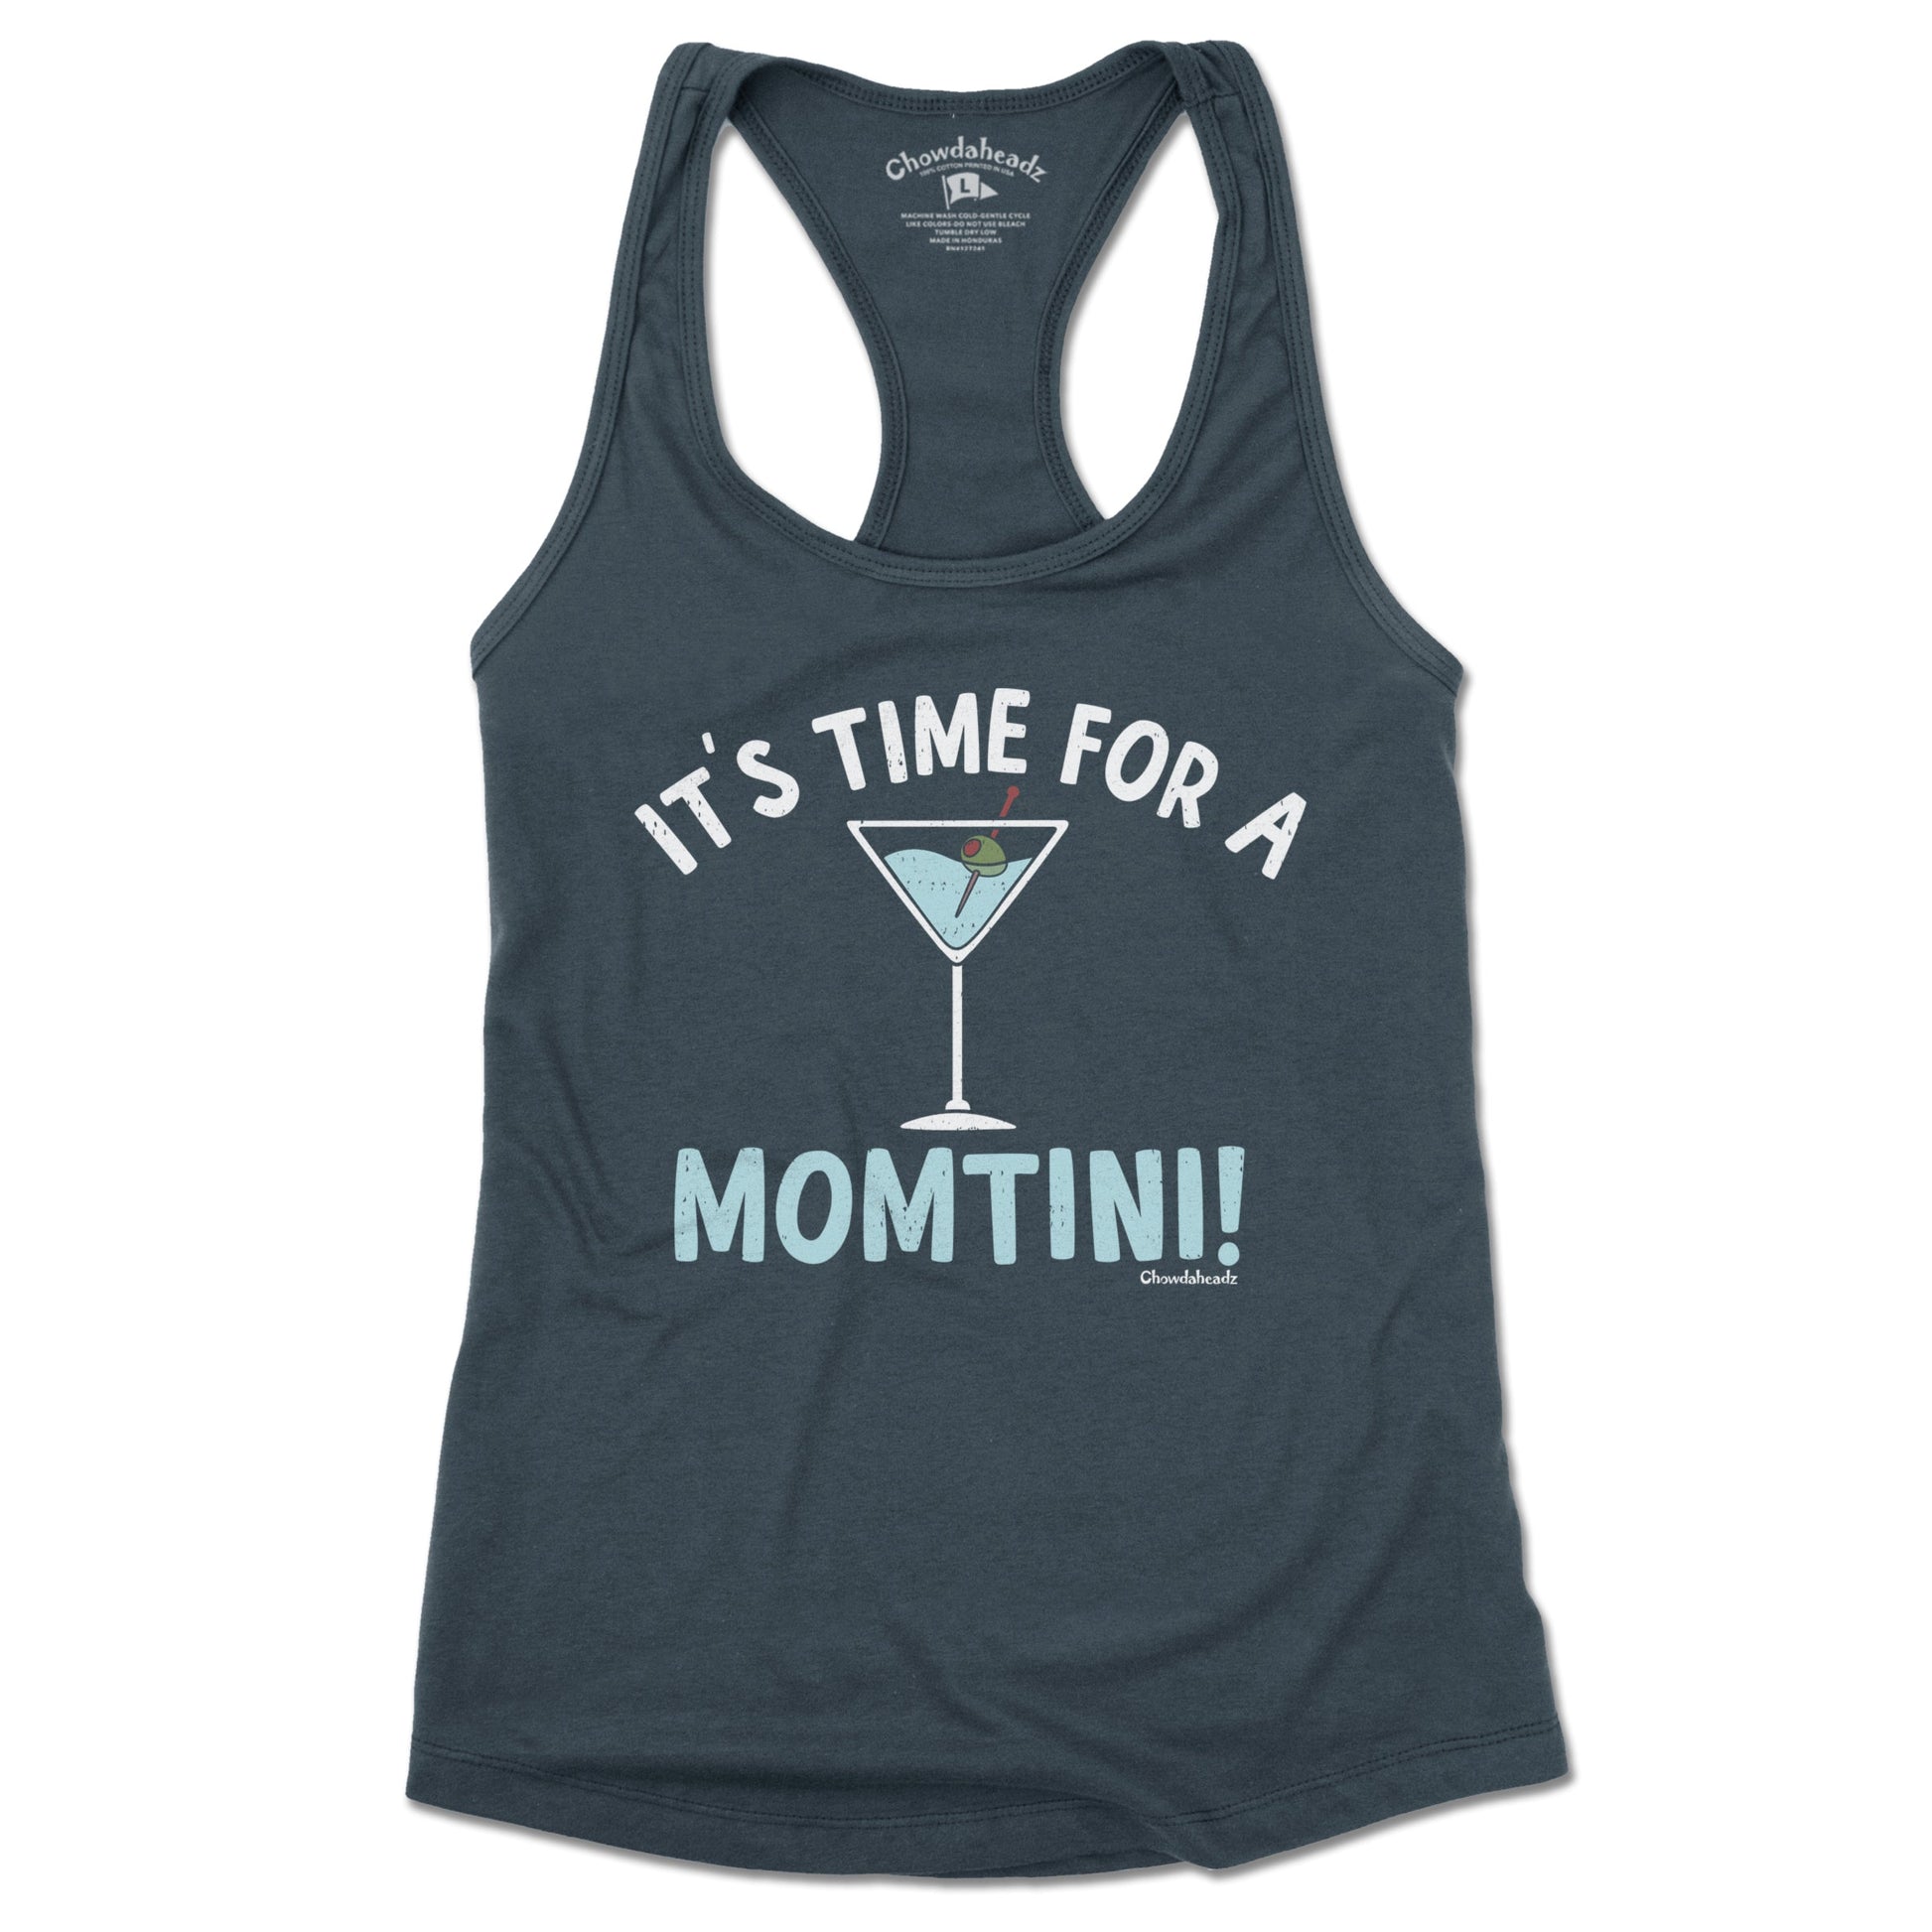 It's Time For a Momtini Ladies Tank Top - Chowdaheadz